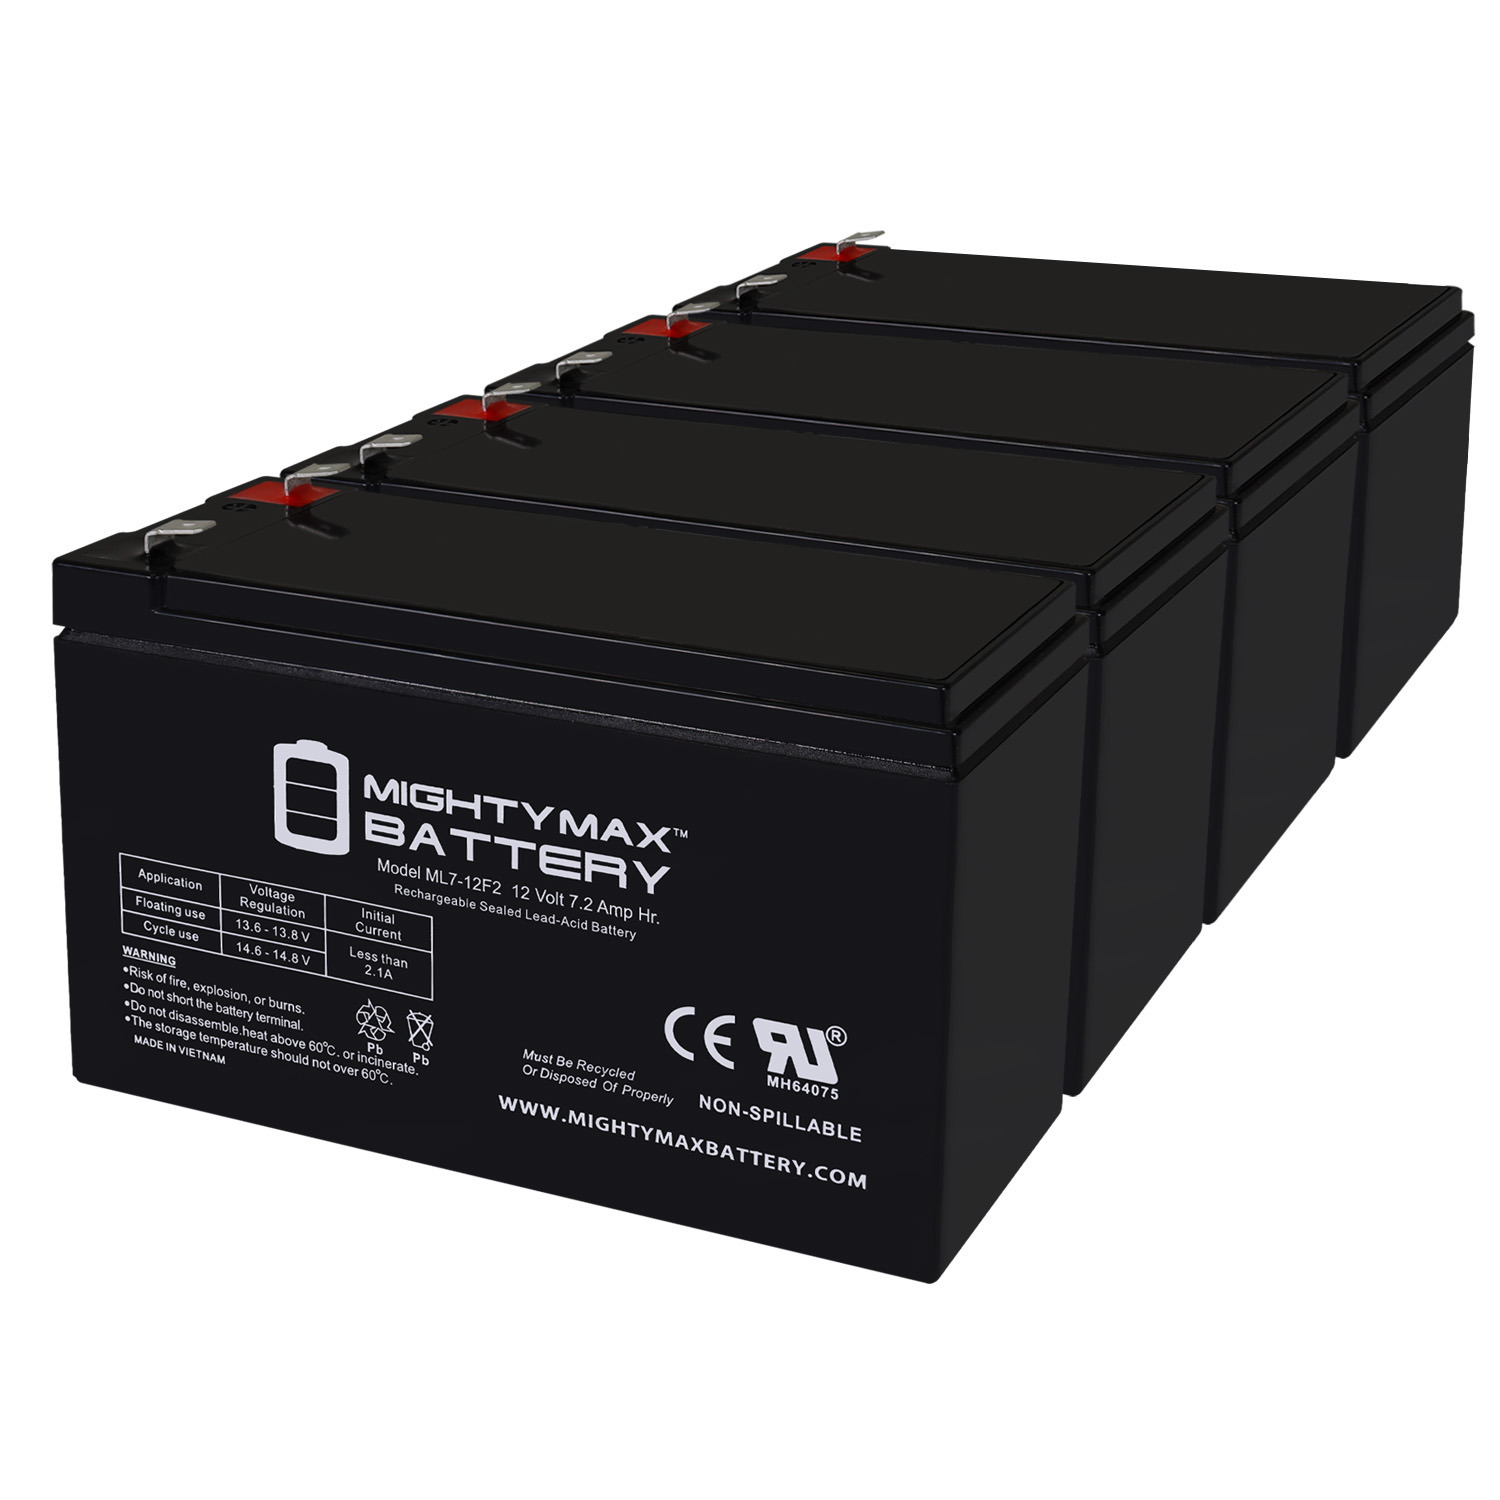 12V 7Ah F2 Replacement Battery for Zeus PC9-12SF2 - 4 Pack